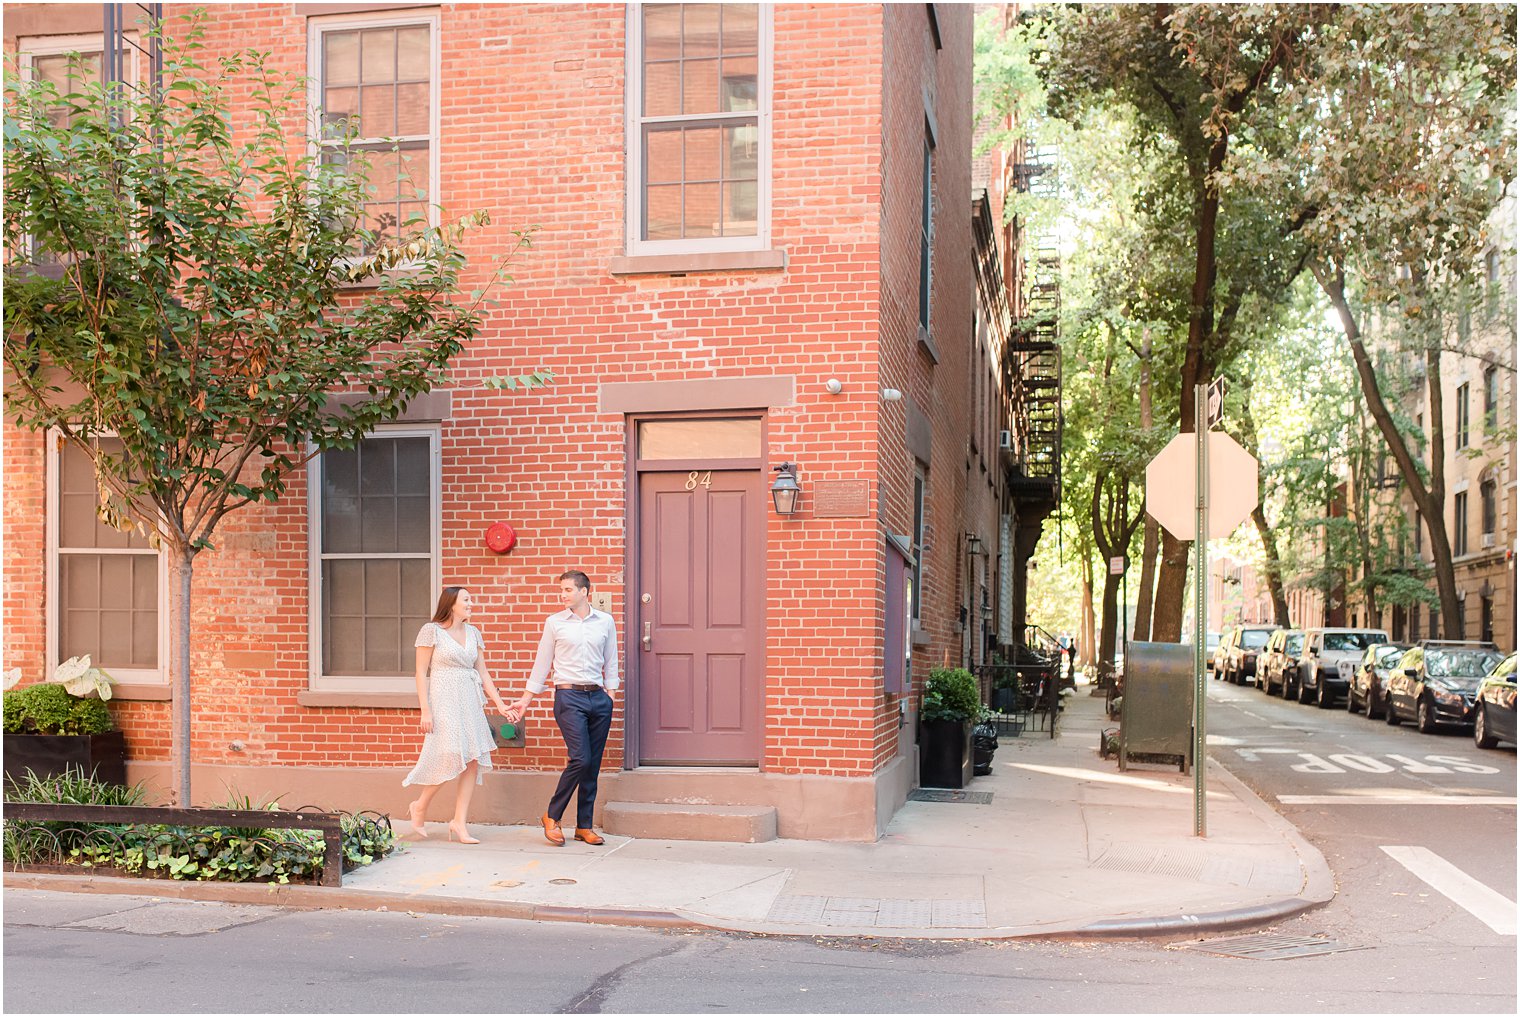 West Village Engagement Photos with couple on street corner